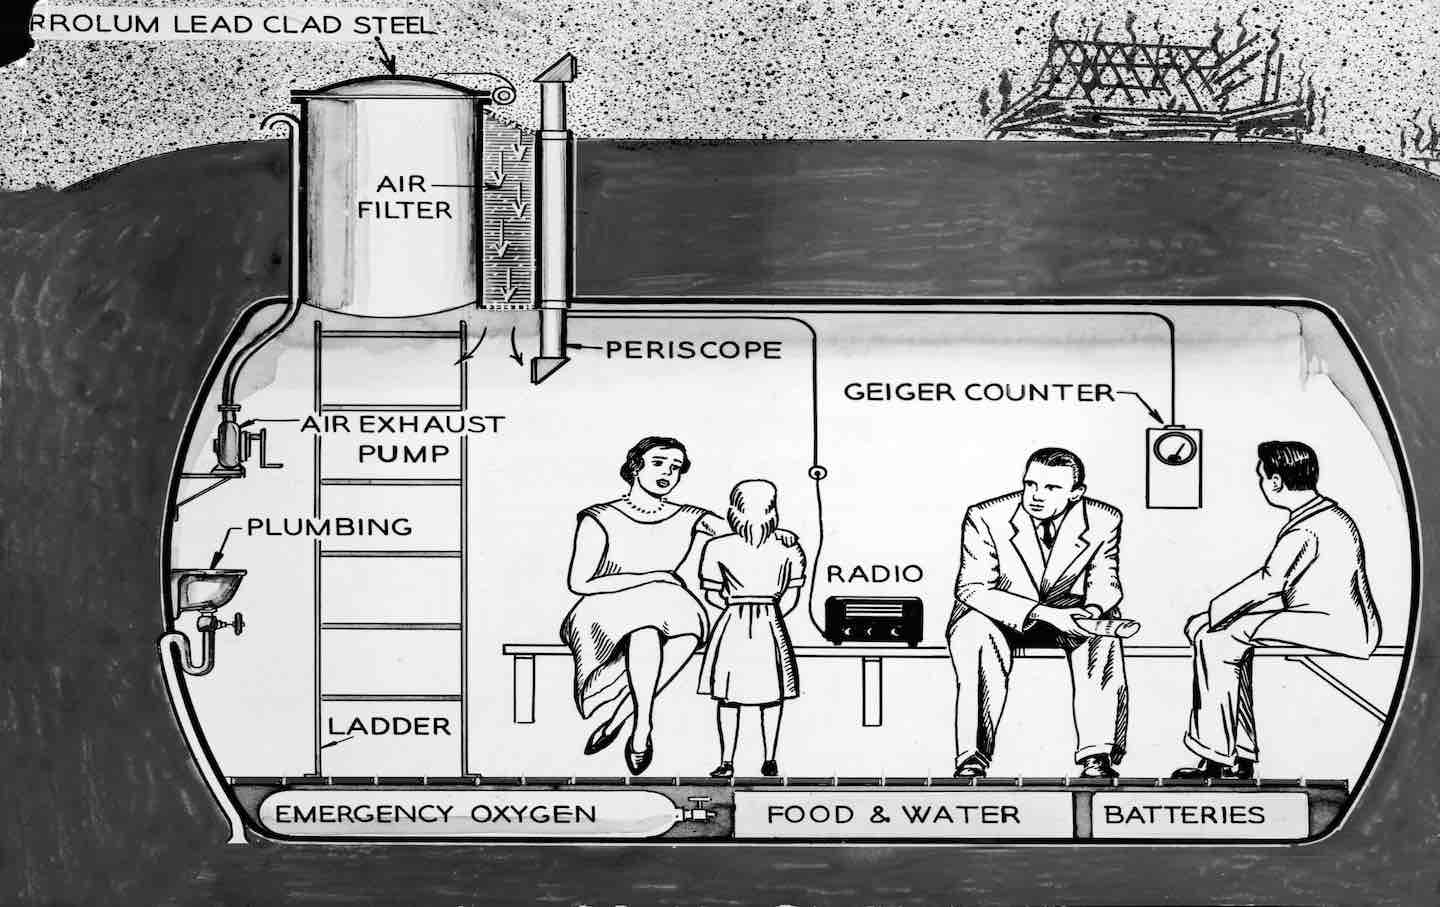 Cross-section illustration depicting a family in their underground lead fallout shelter, equipped with a geiger counter, periscope, air filter, etc., early 1960s.